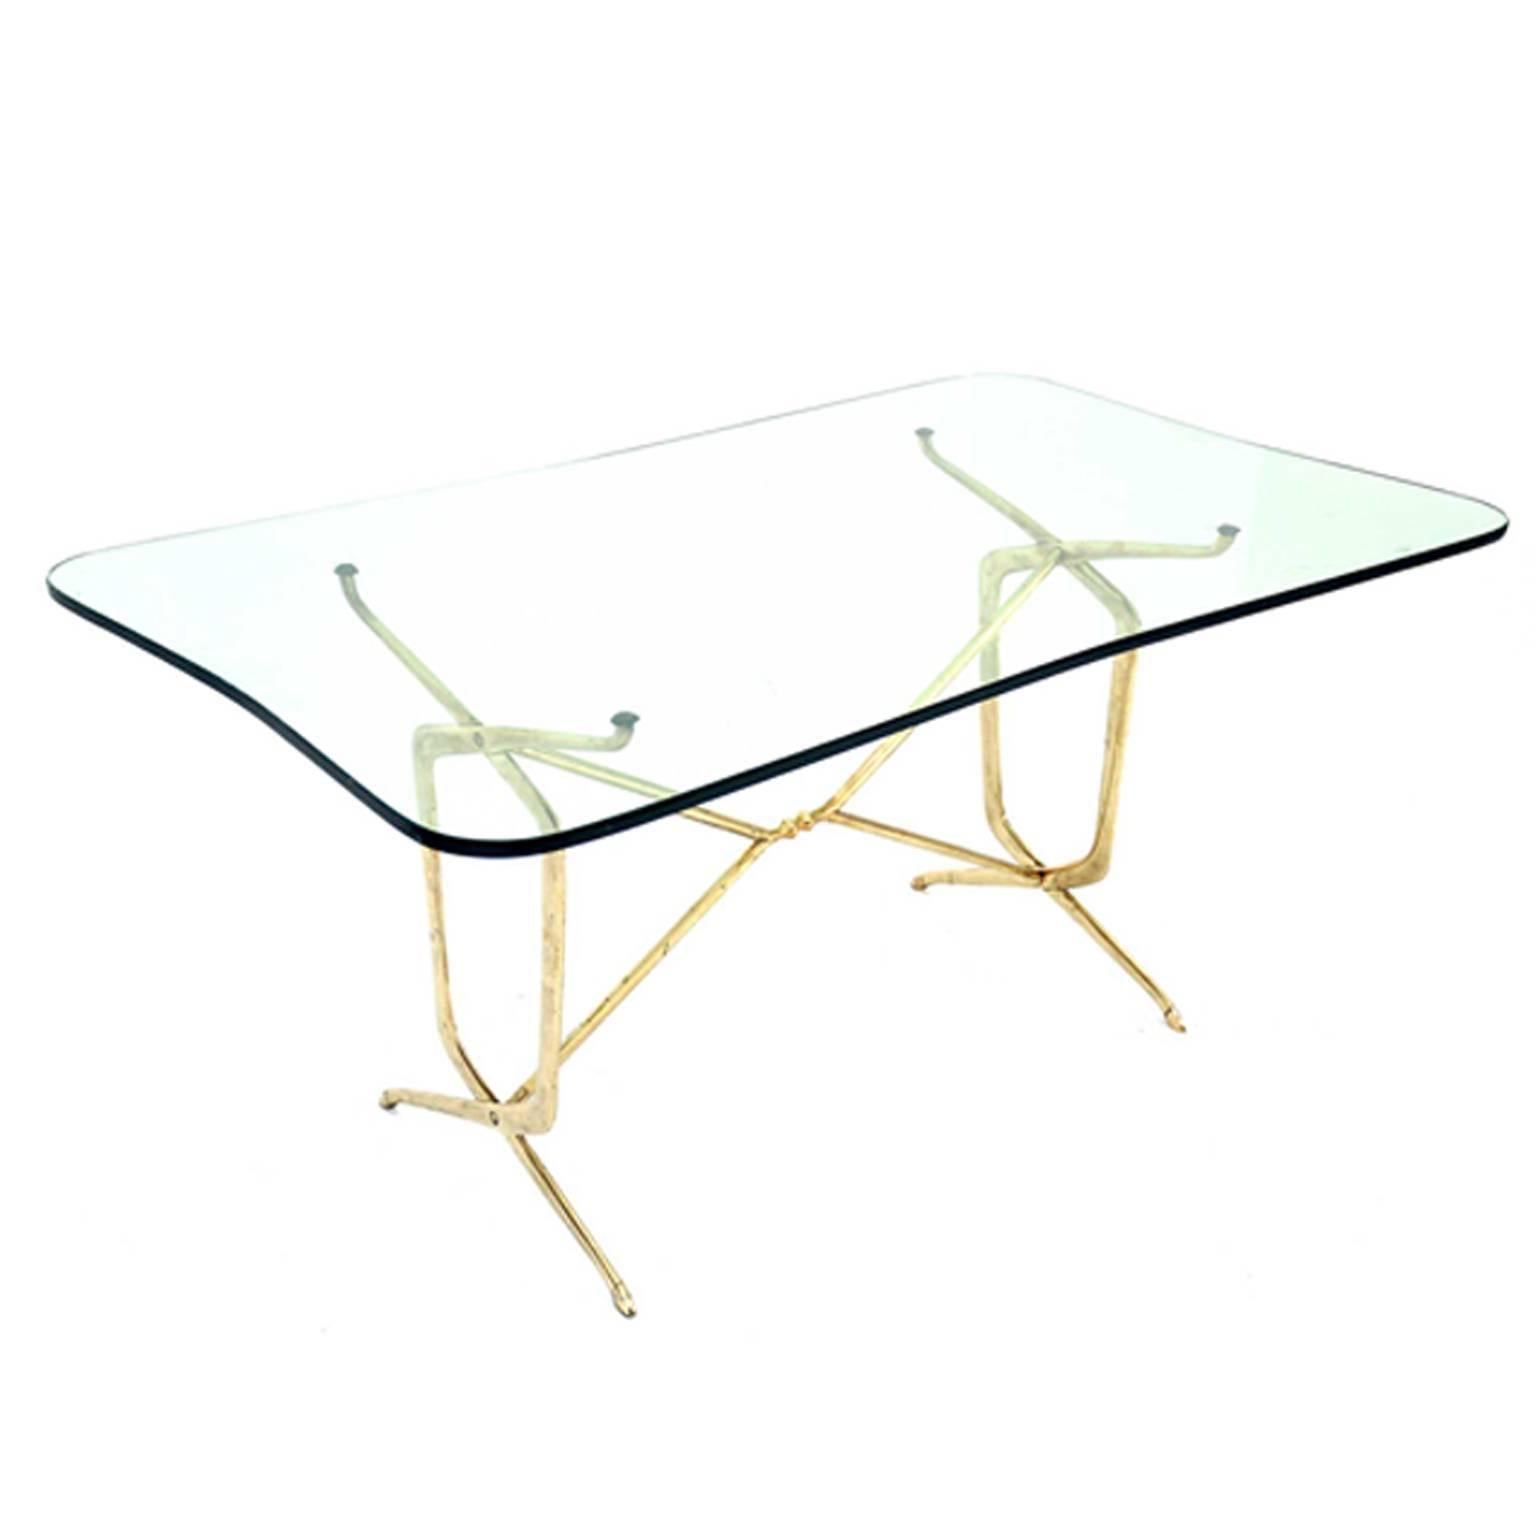 This piece was designed in Italy in 1950s. The rack is made of brass and the tabletop of glass.